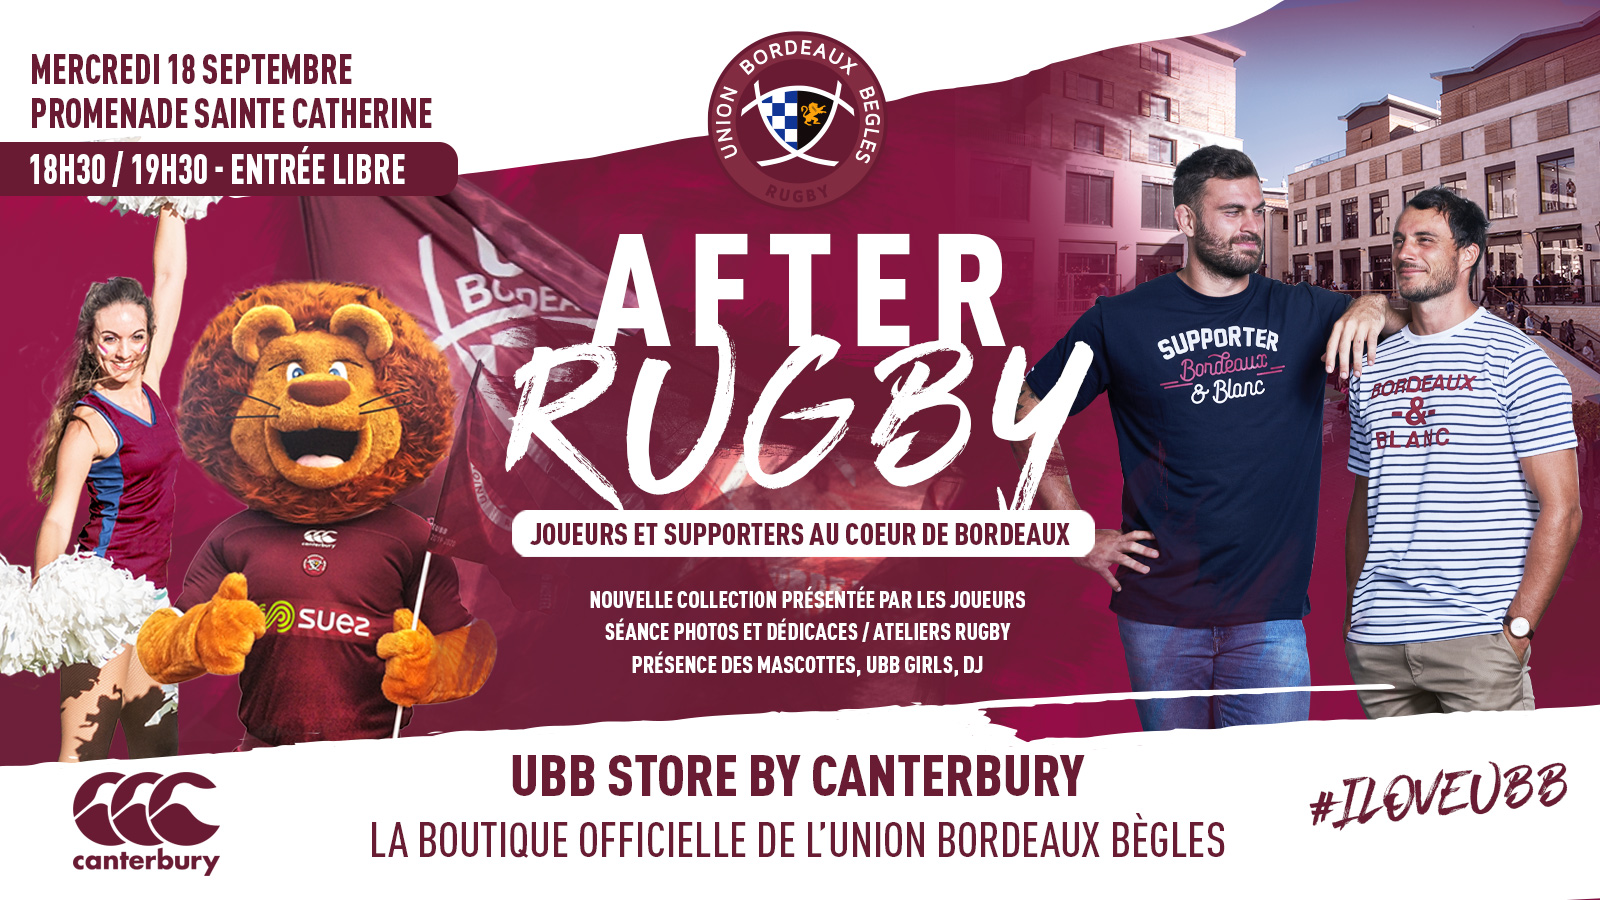 After Rugby mercredi 18 septembre